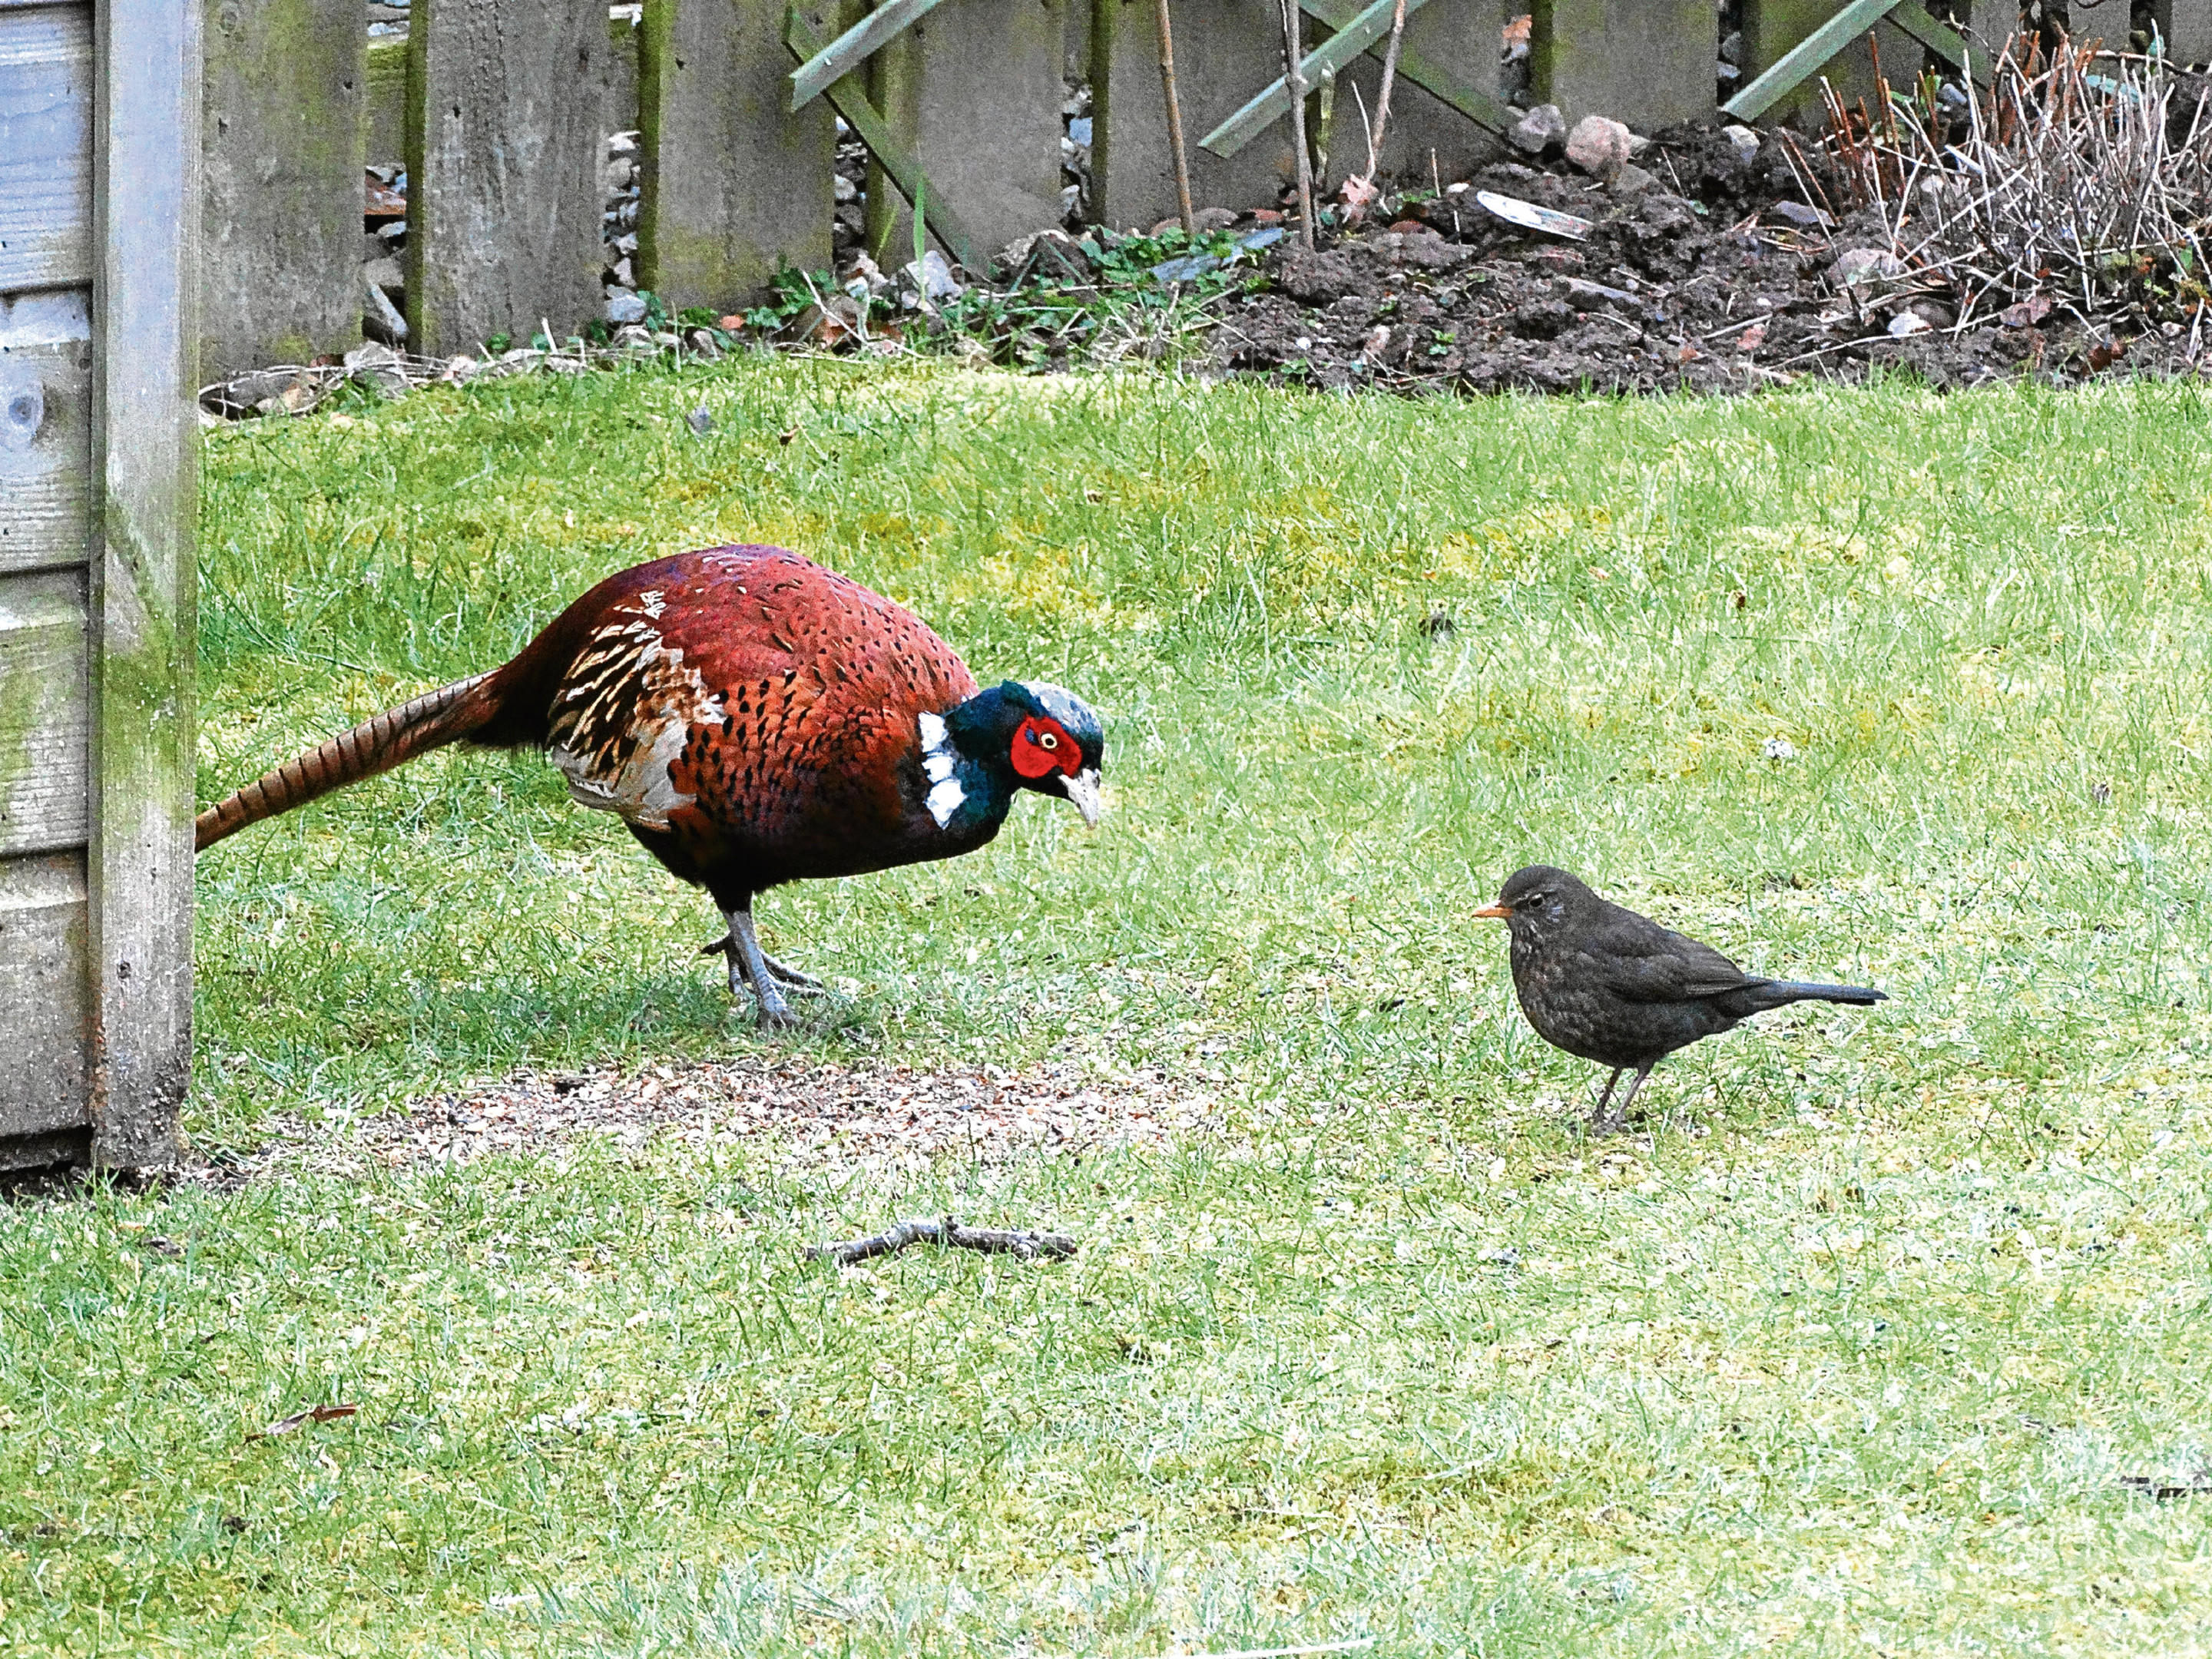 The cock pheasant that visits the Whitsons' garden is joined by a jackdaw.